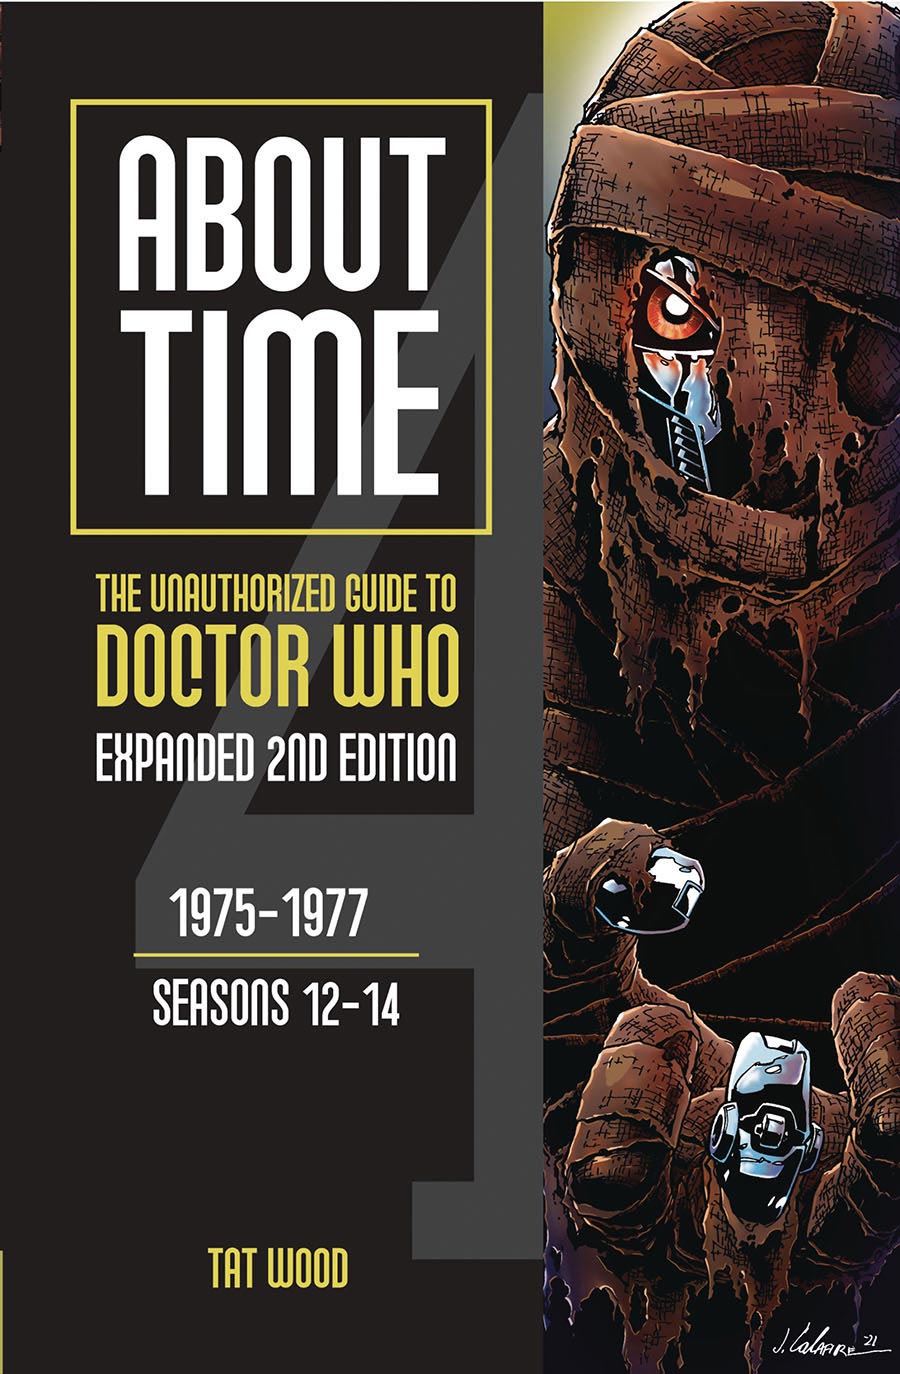 About Time Unauthorized Guide To Doctor Who 1975-1977 Seasons 12-14 TP Expanded 2nd Edition